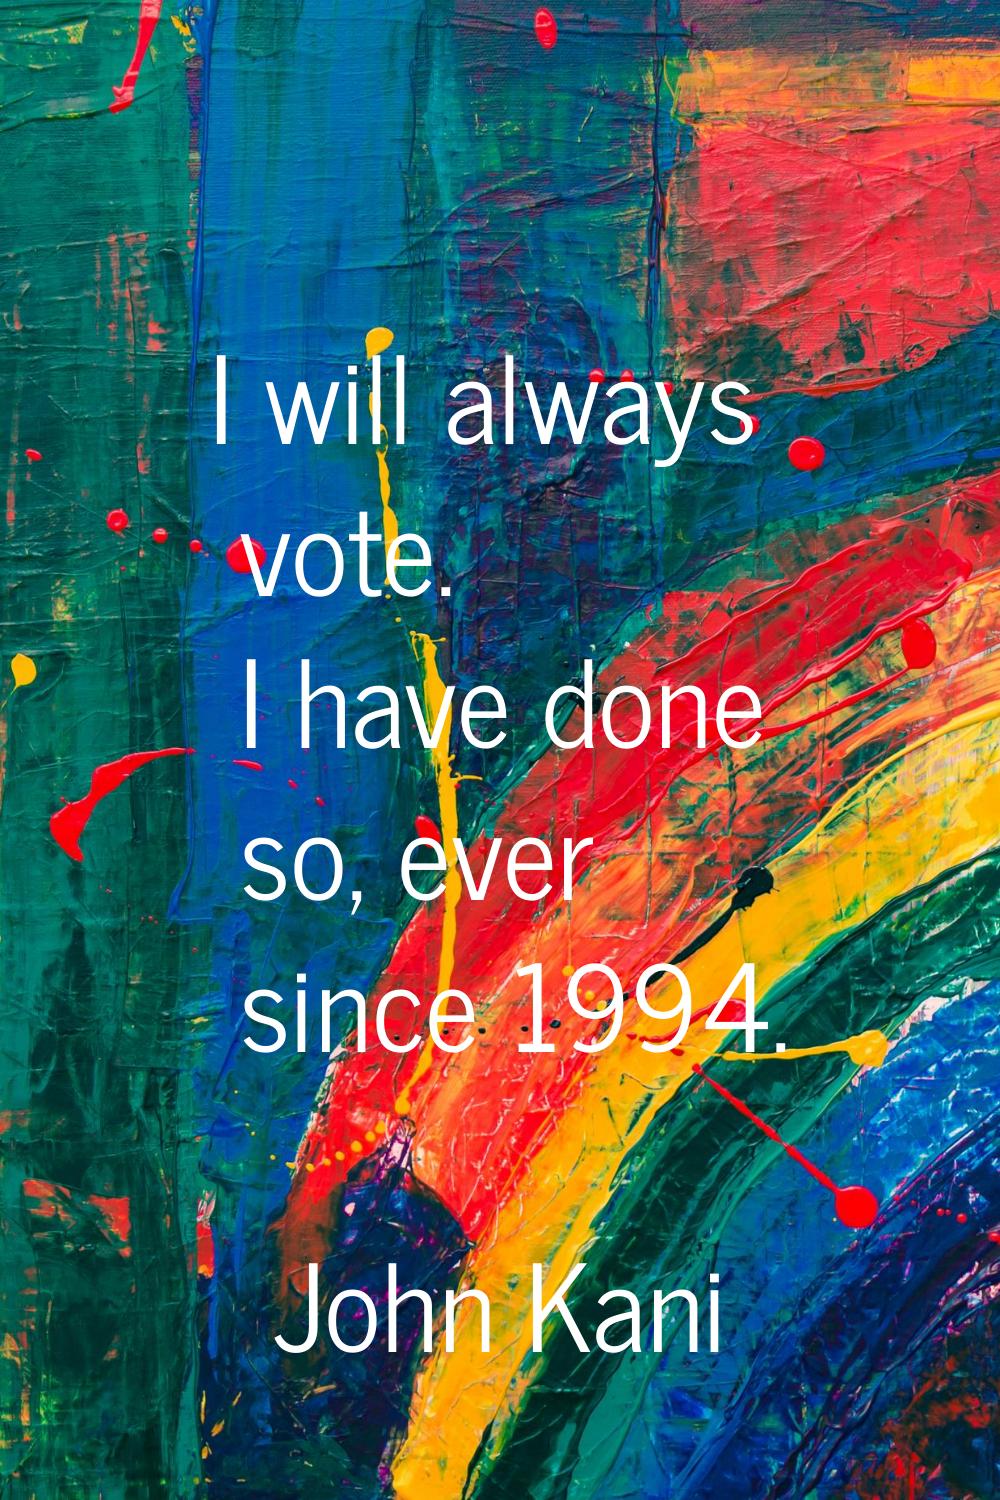 I will always vote. I have done so, ever since 1994.